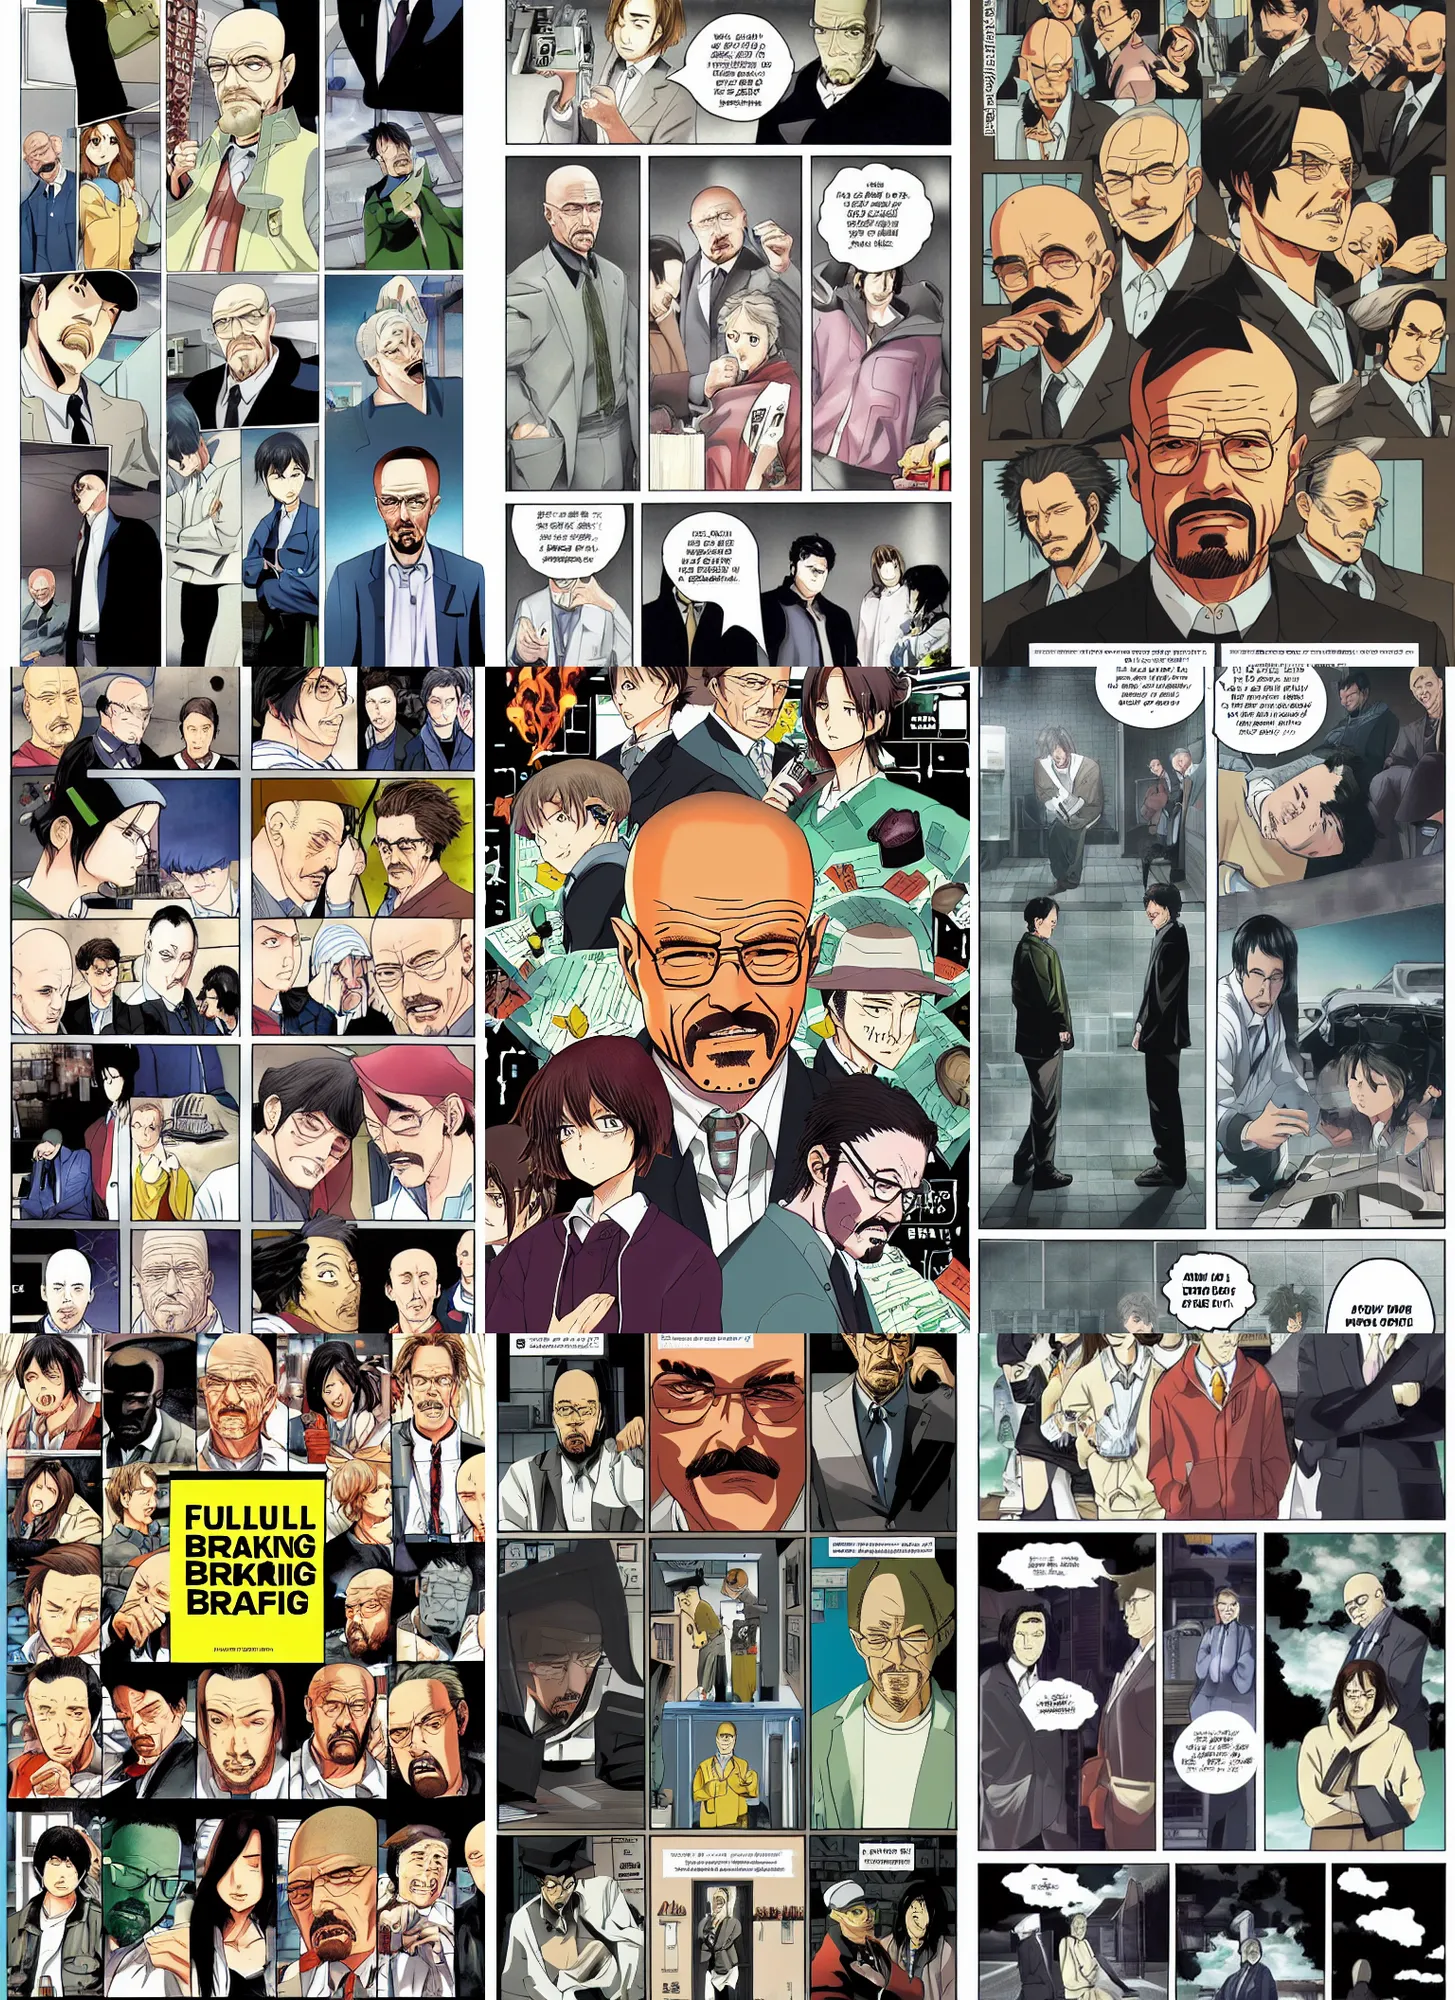 Prompt: full page of the manga adaptation of breaking bad, full color